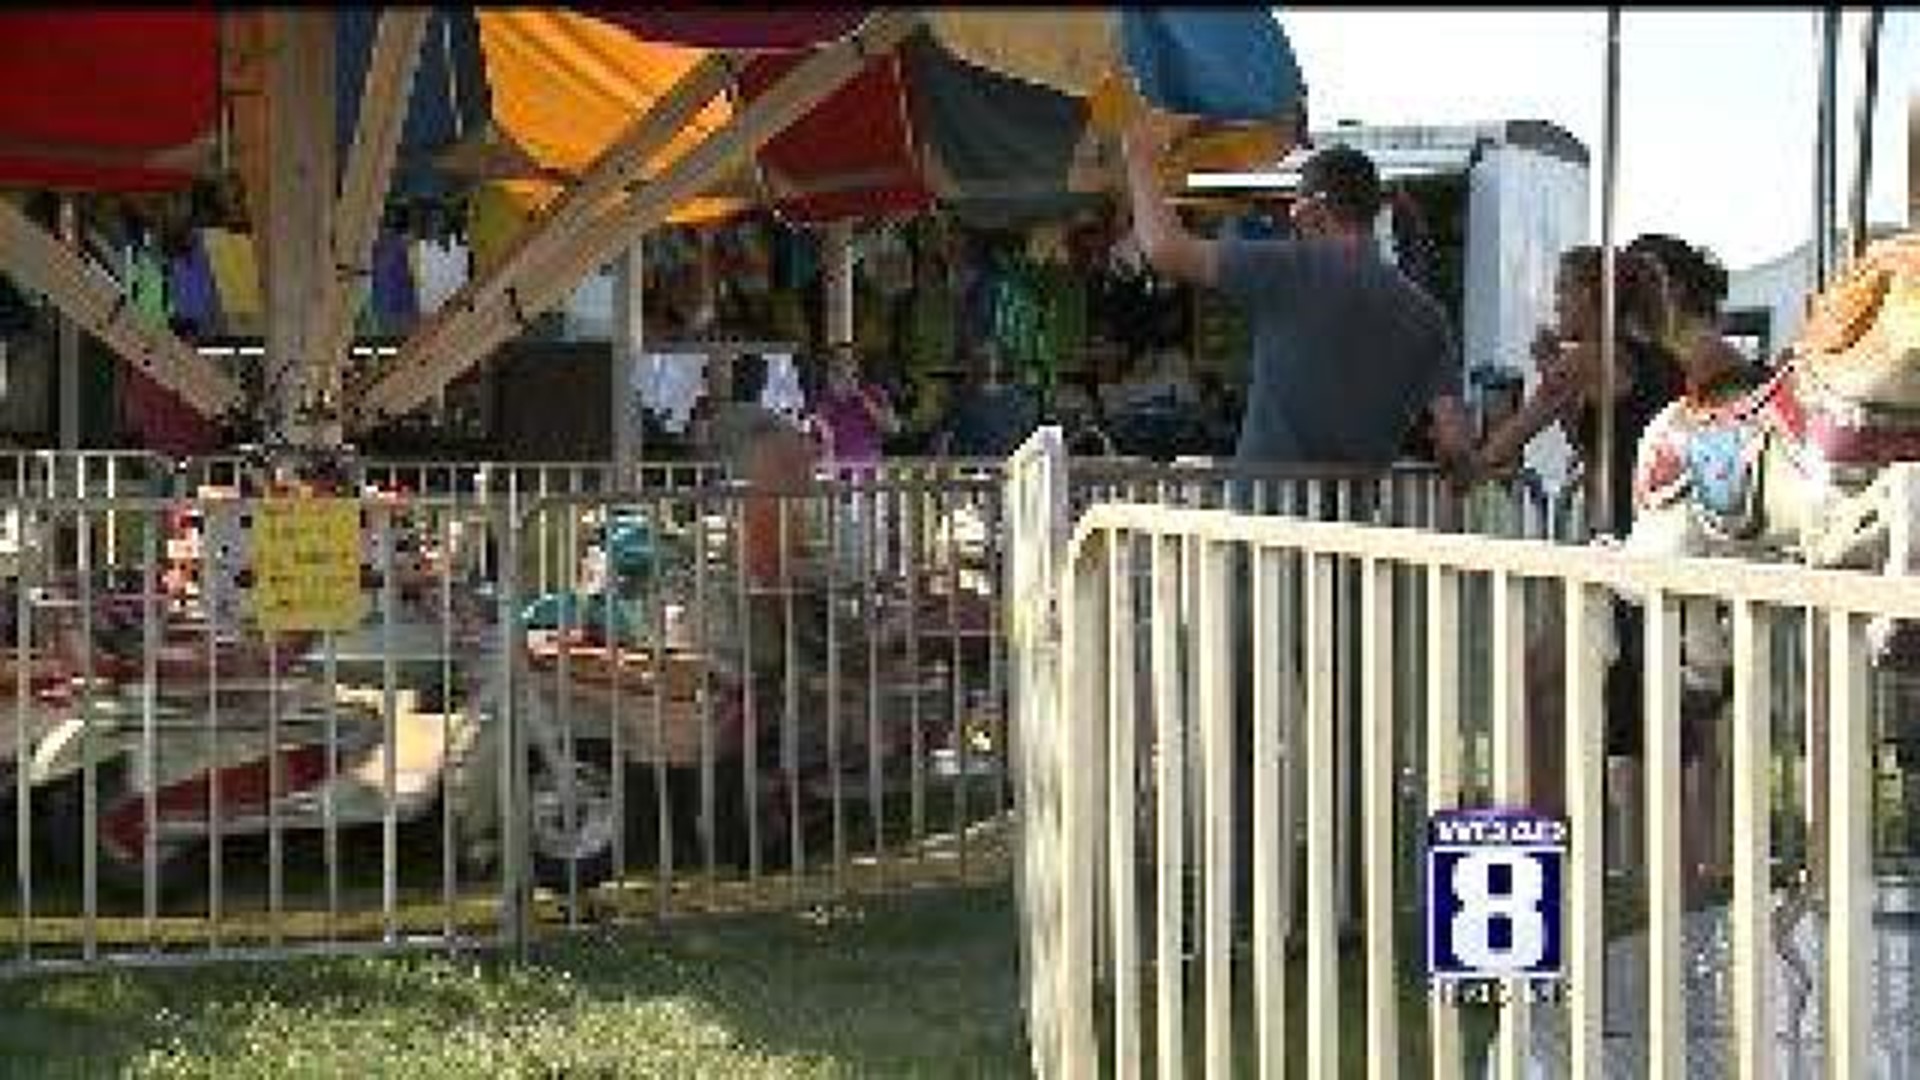 Heat can\'t keep crowds from Clinton Co Fair